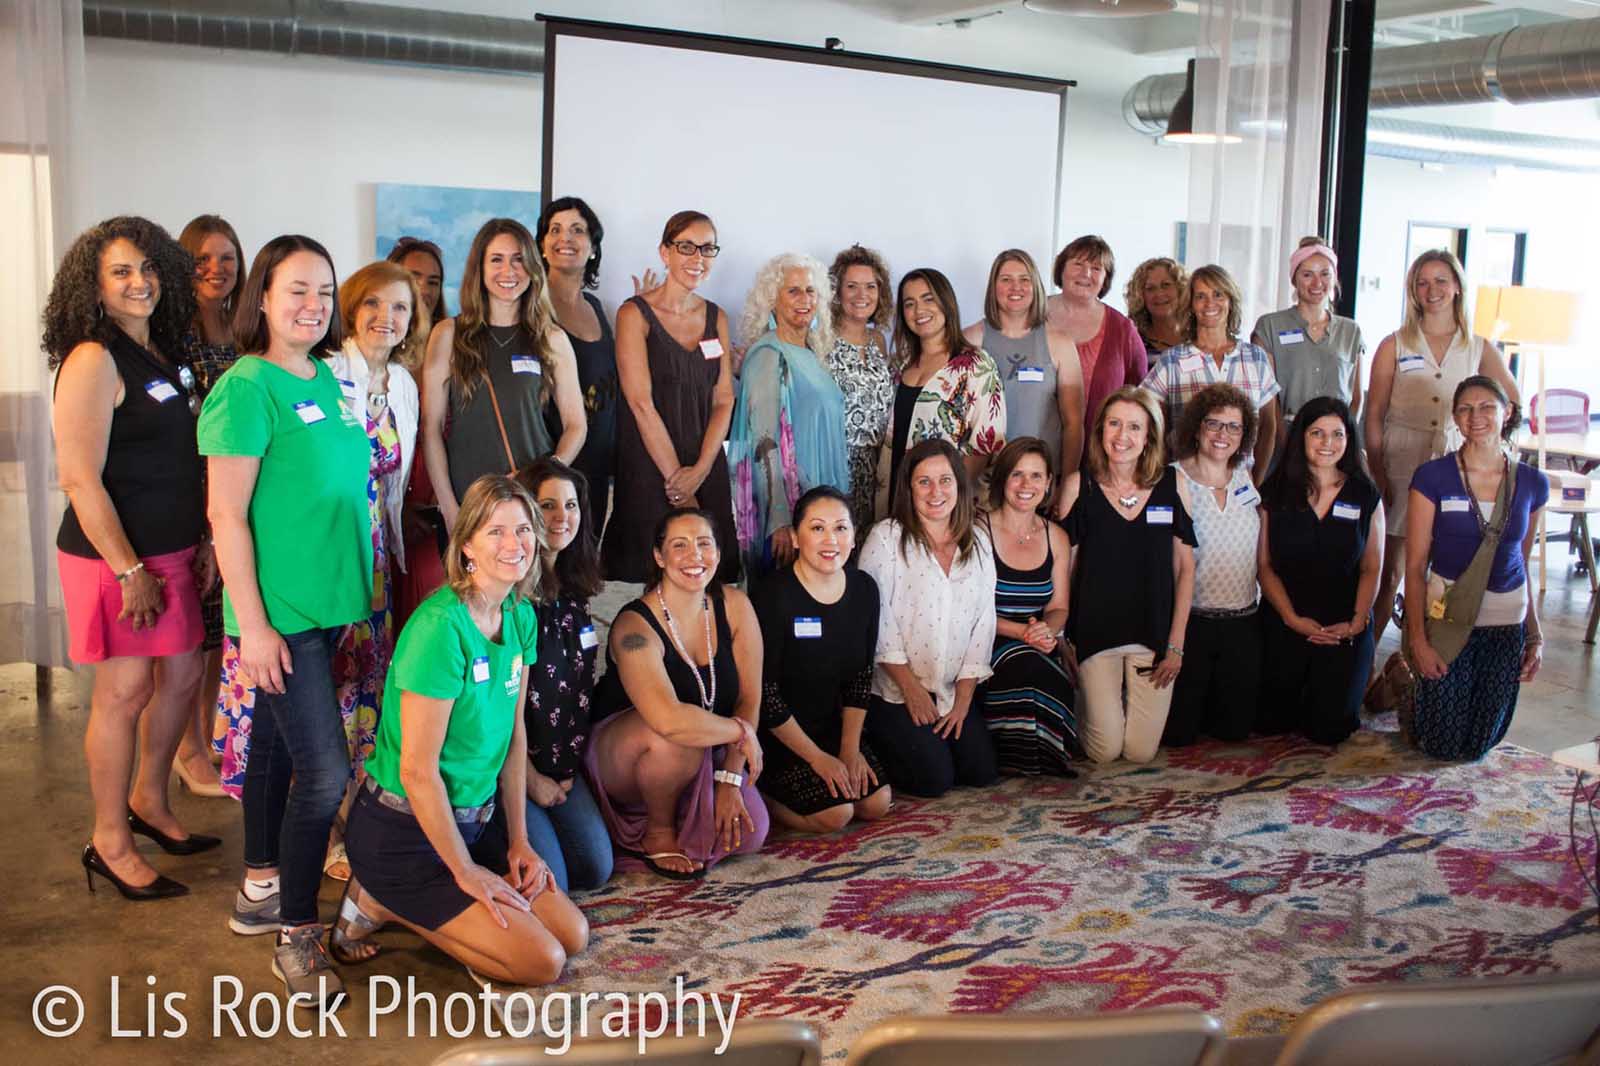 MetroWest Women's Network Event Group Photo